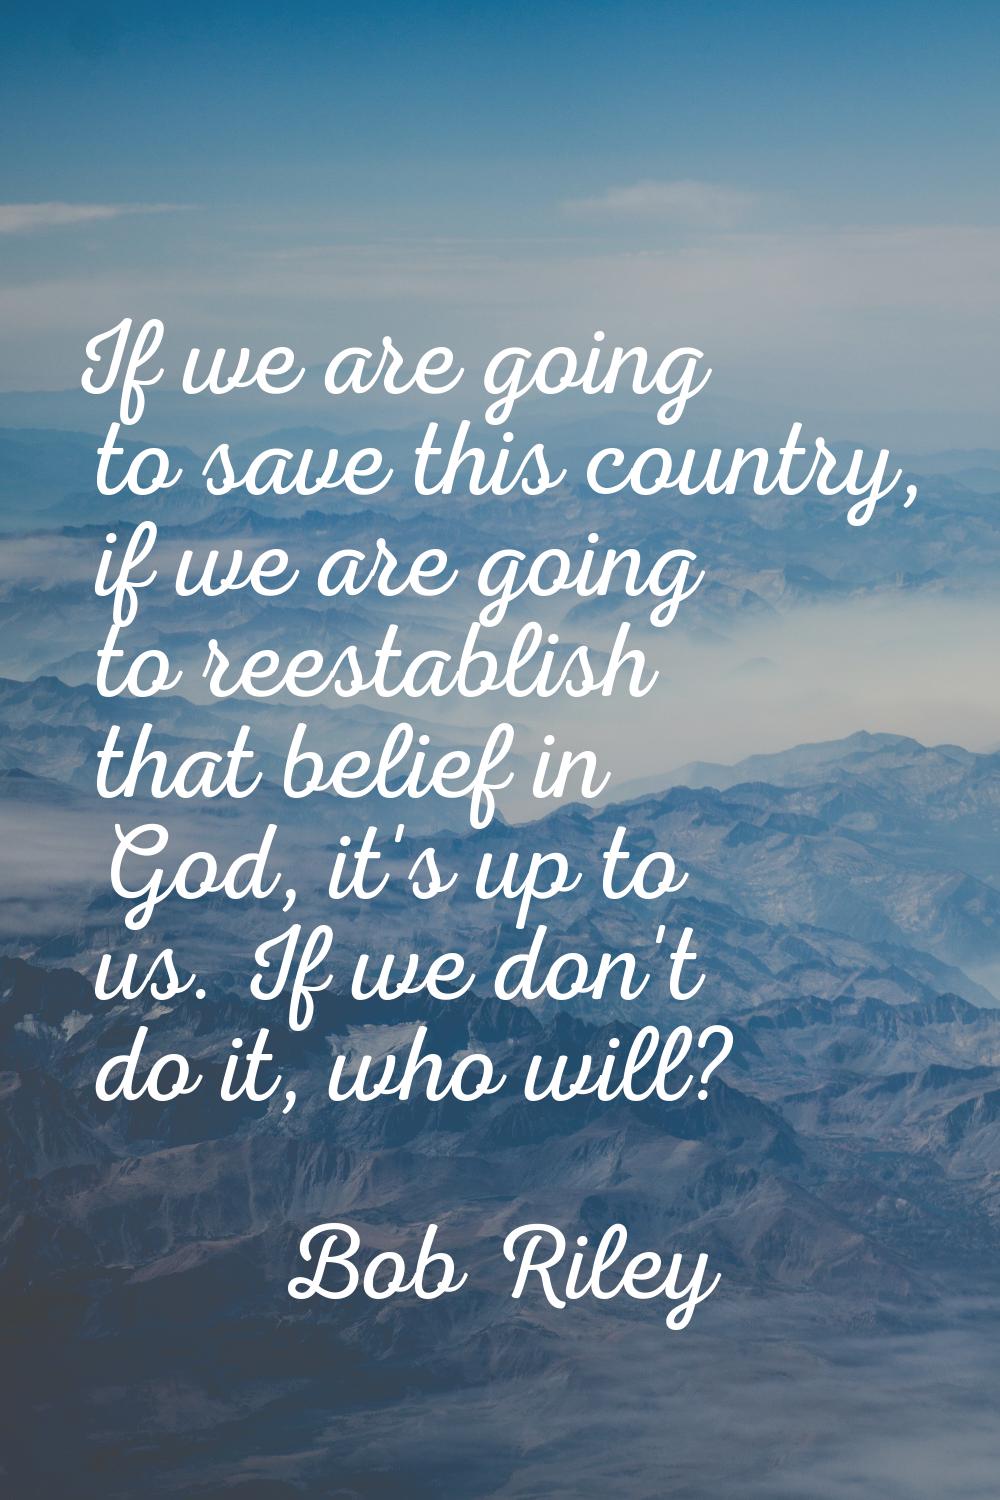 If we are going to save this country, if we are going to reestablish that belief in God, it's up to